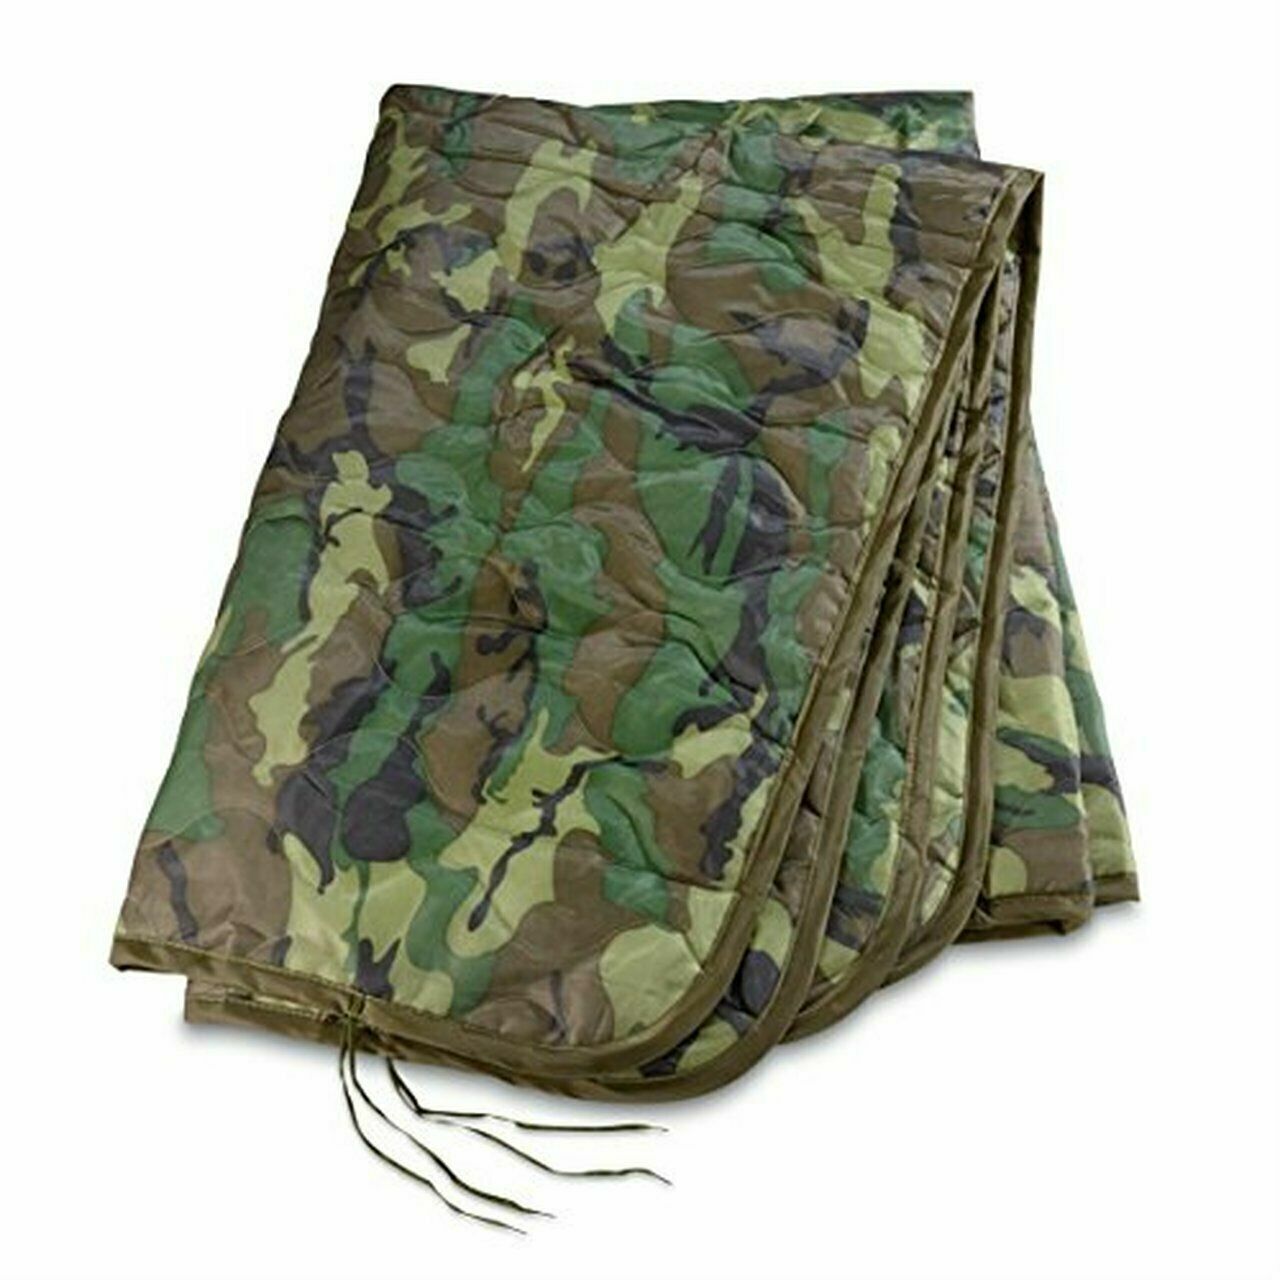 New Military style Poncho Liner Woodland Camouflage Woobie Blanket USA Made